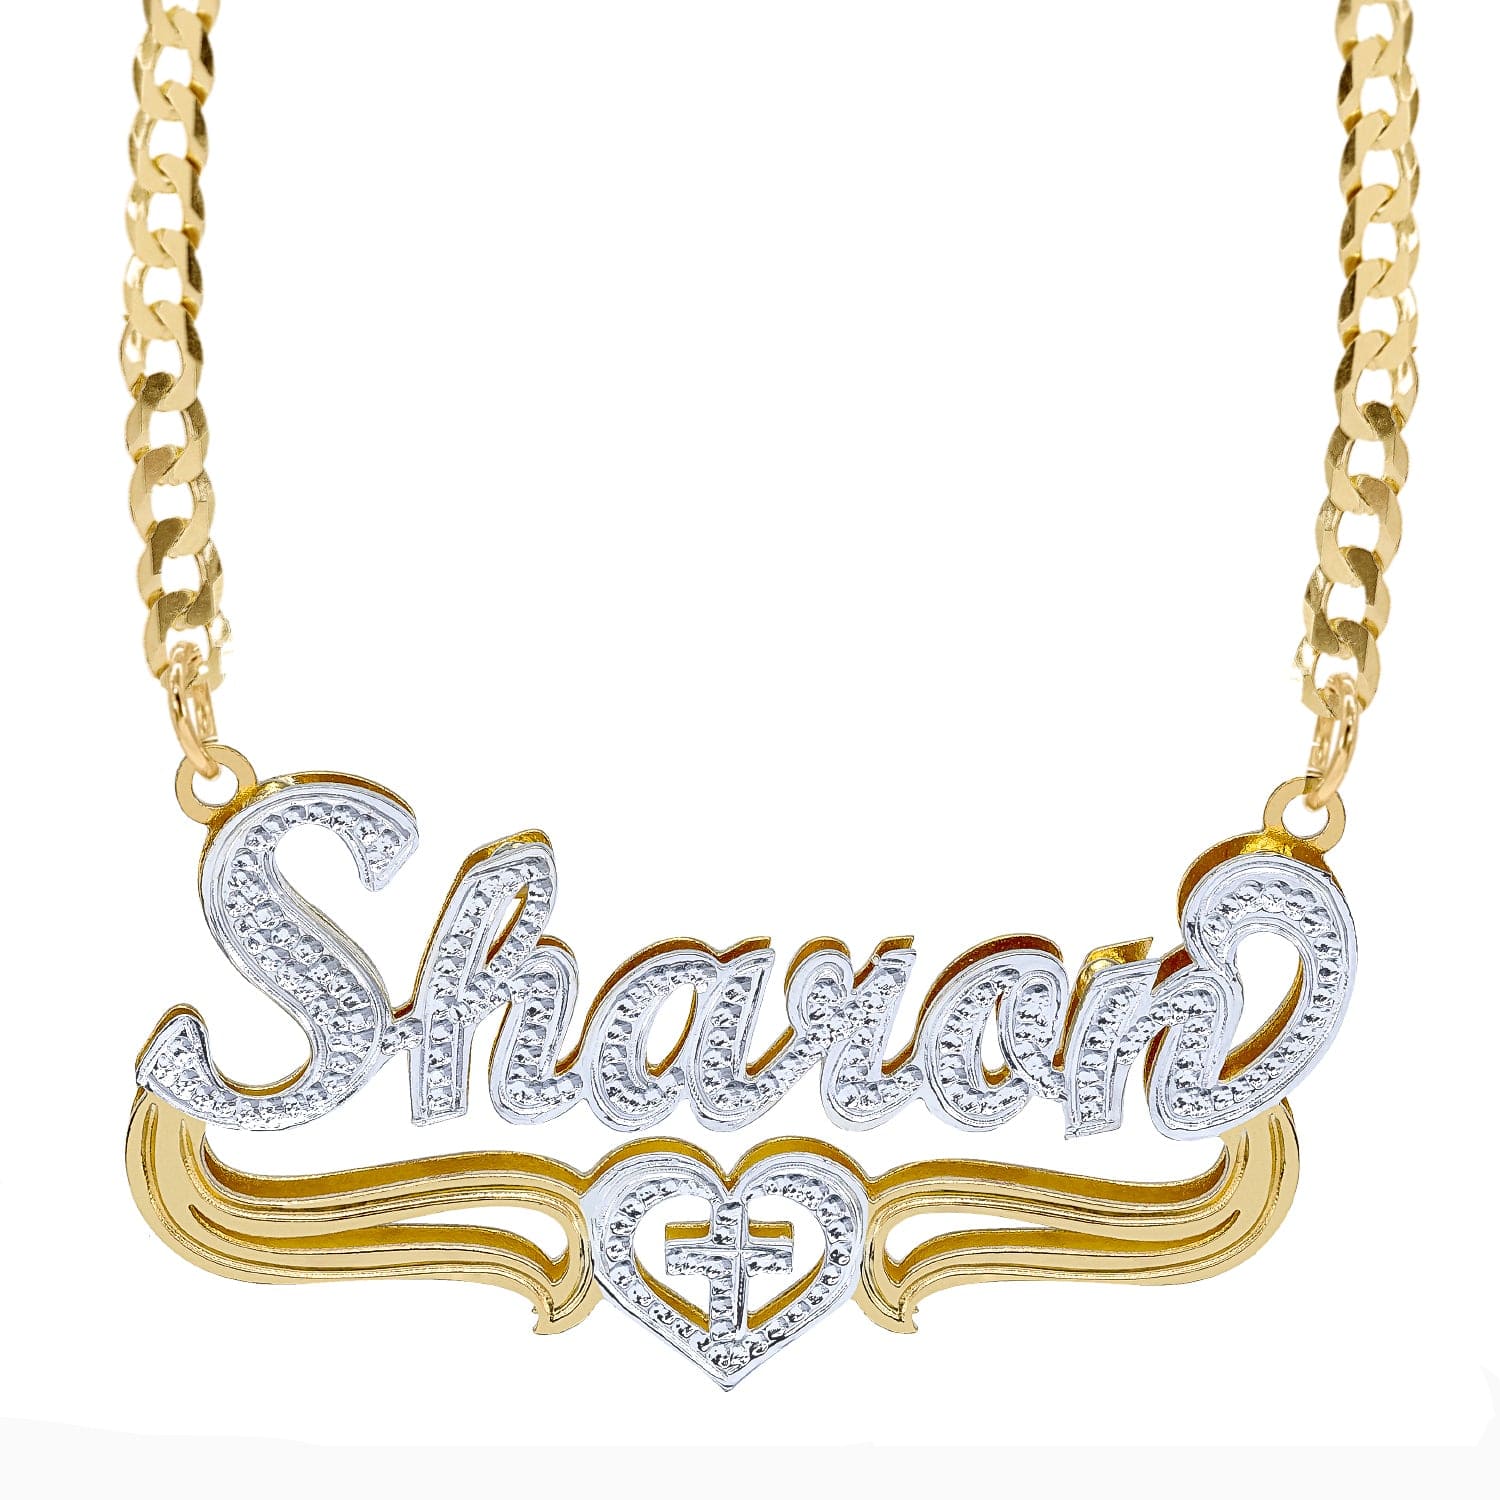 14k Gold over Sterling Silver / Cuban Chain Double Plated Nameplate Necklace "Sharon" with Cuban chain